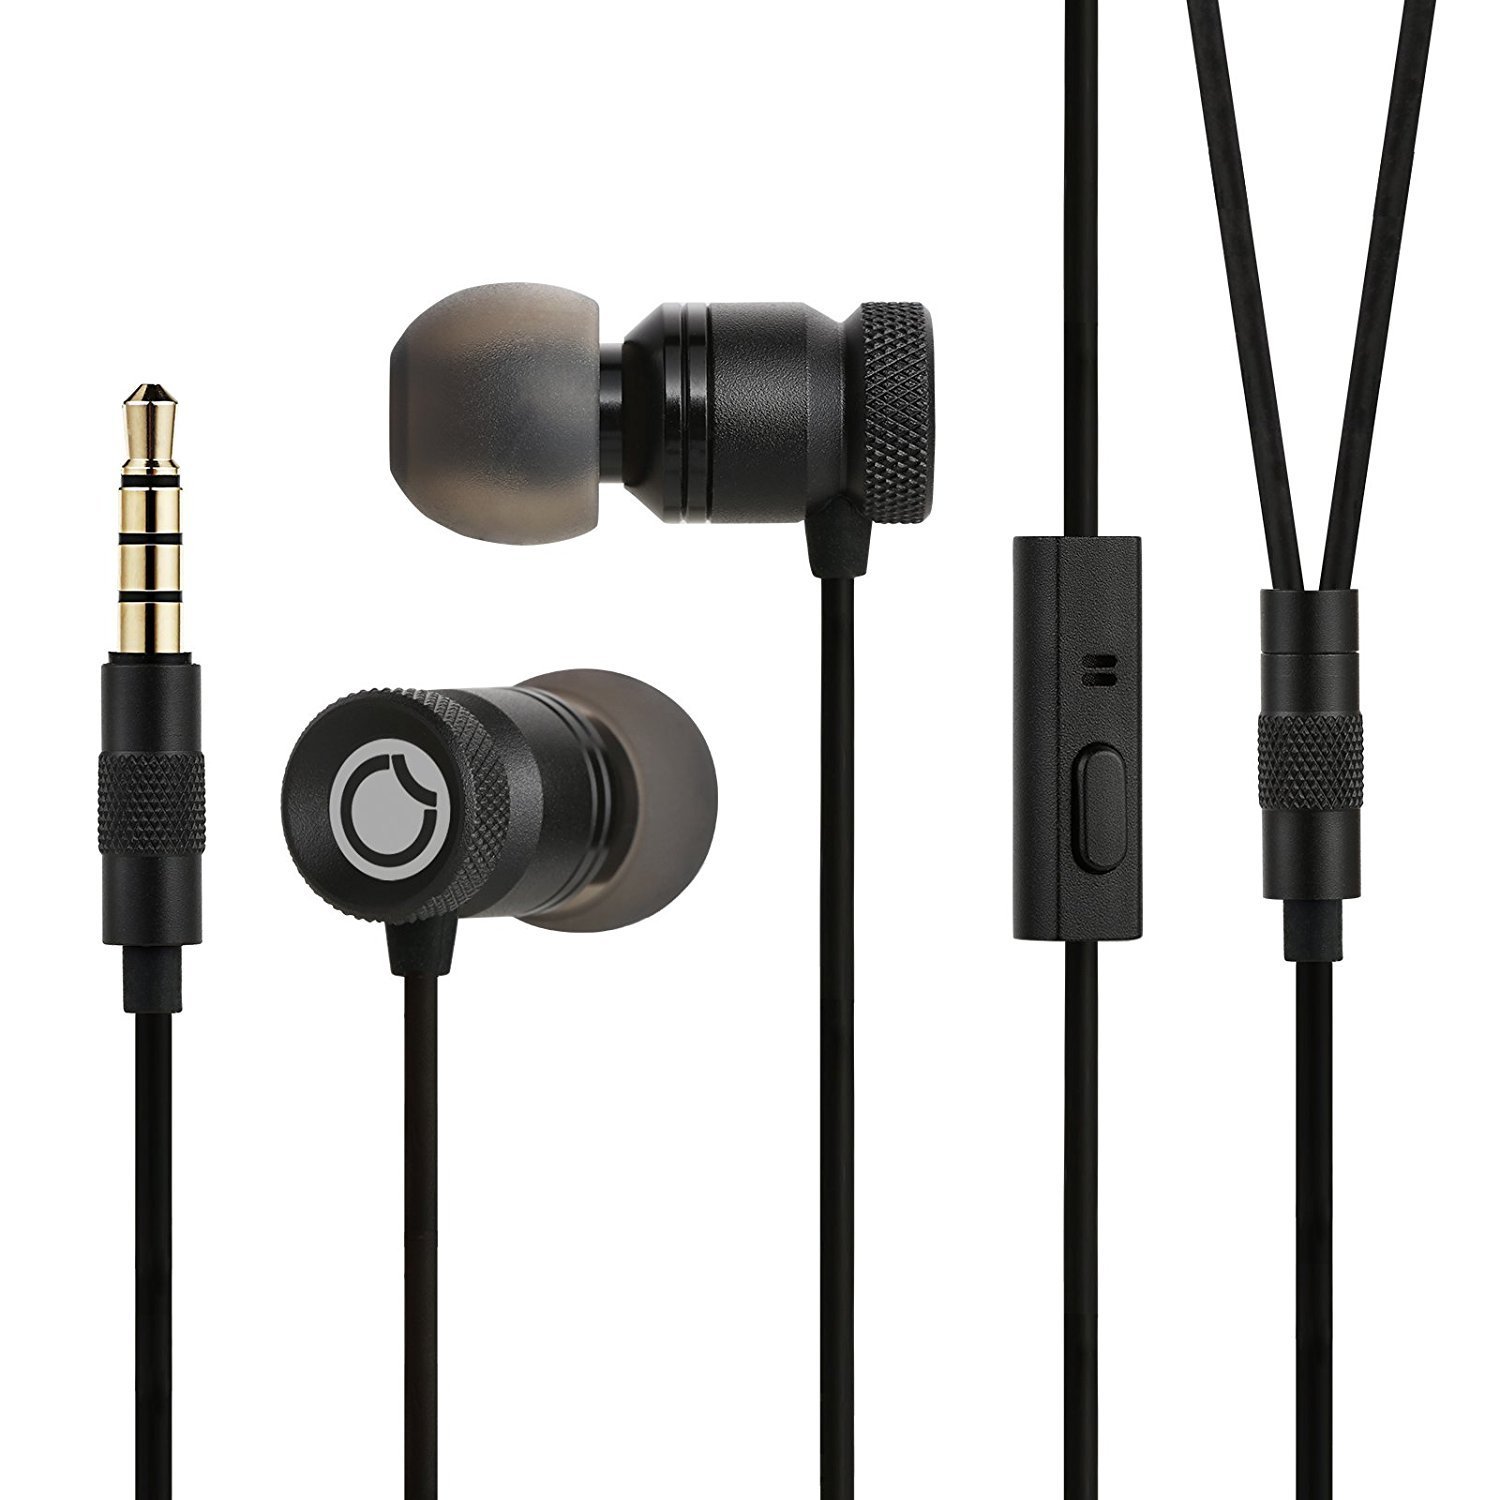 Today only: GGMM headphones with microphone for $15